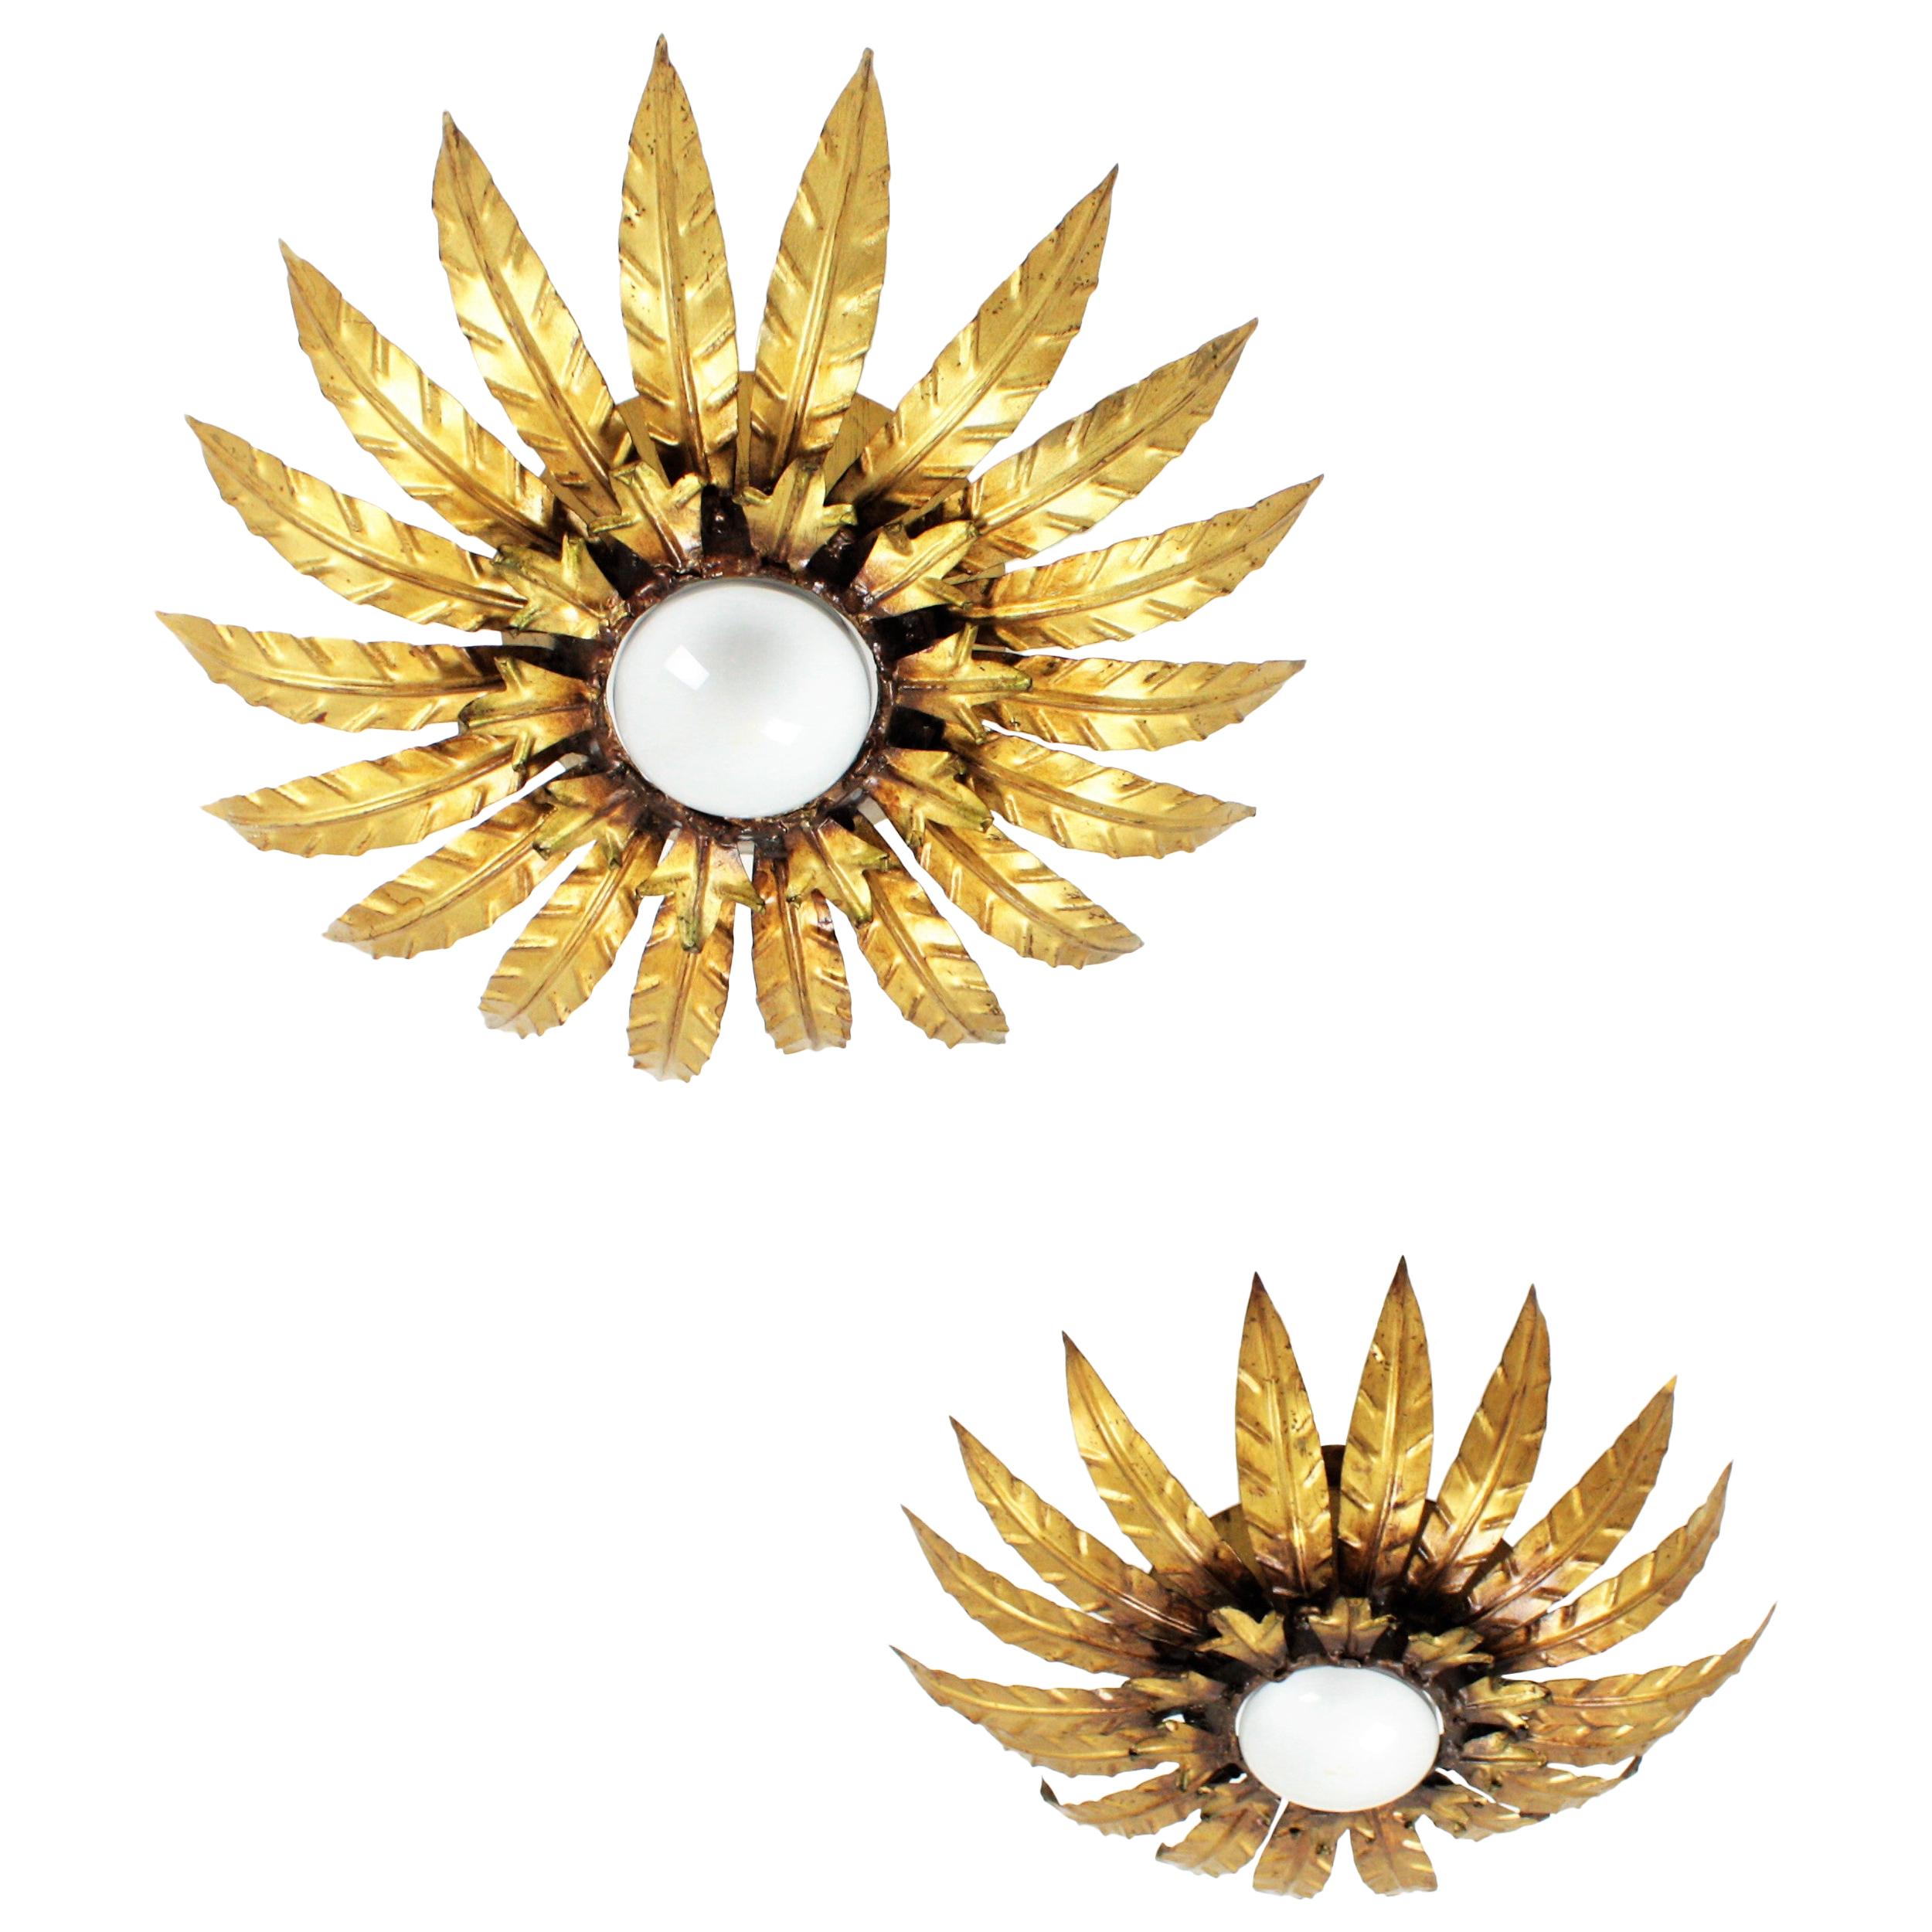 Pair of Sunburst Leafed Ceiling Light Fixtures or Wall Sconces in Gilt Metal